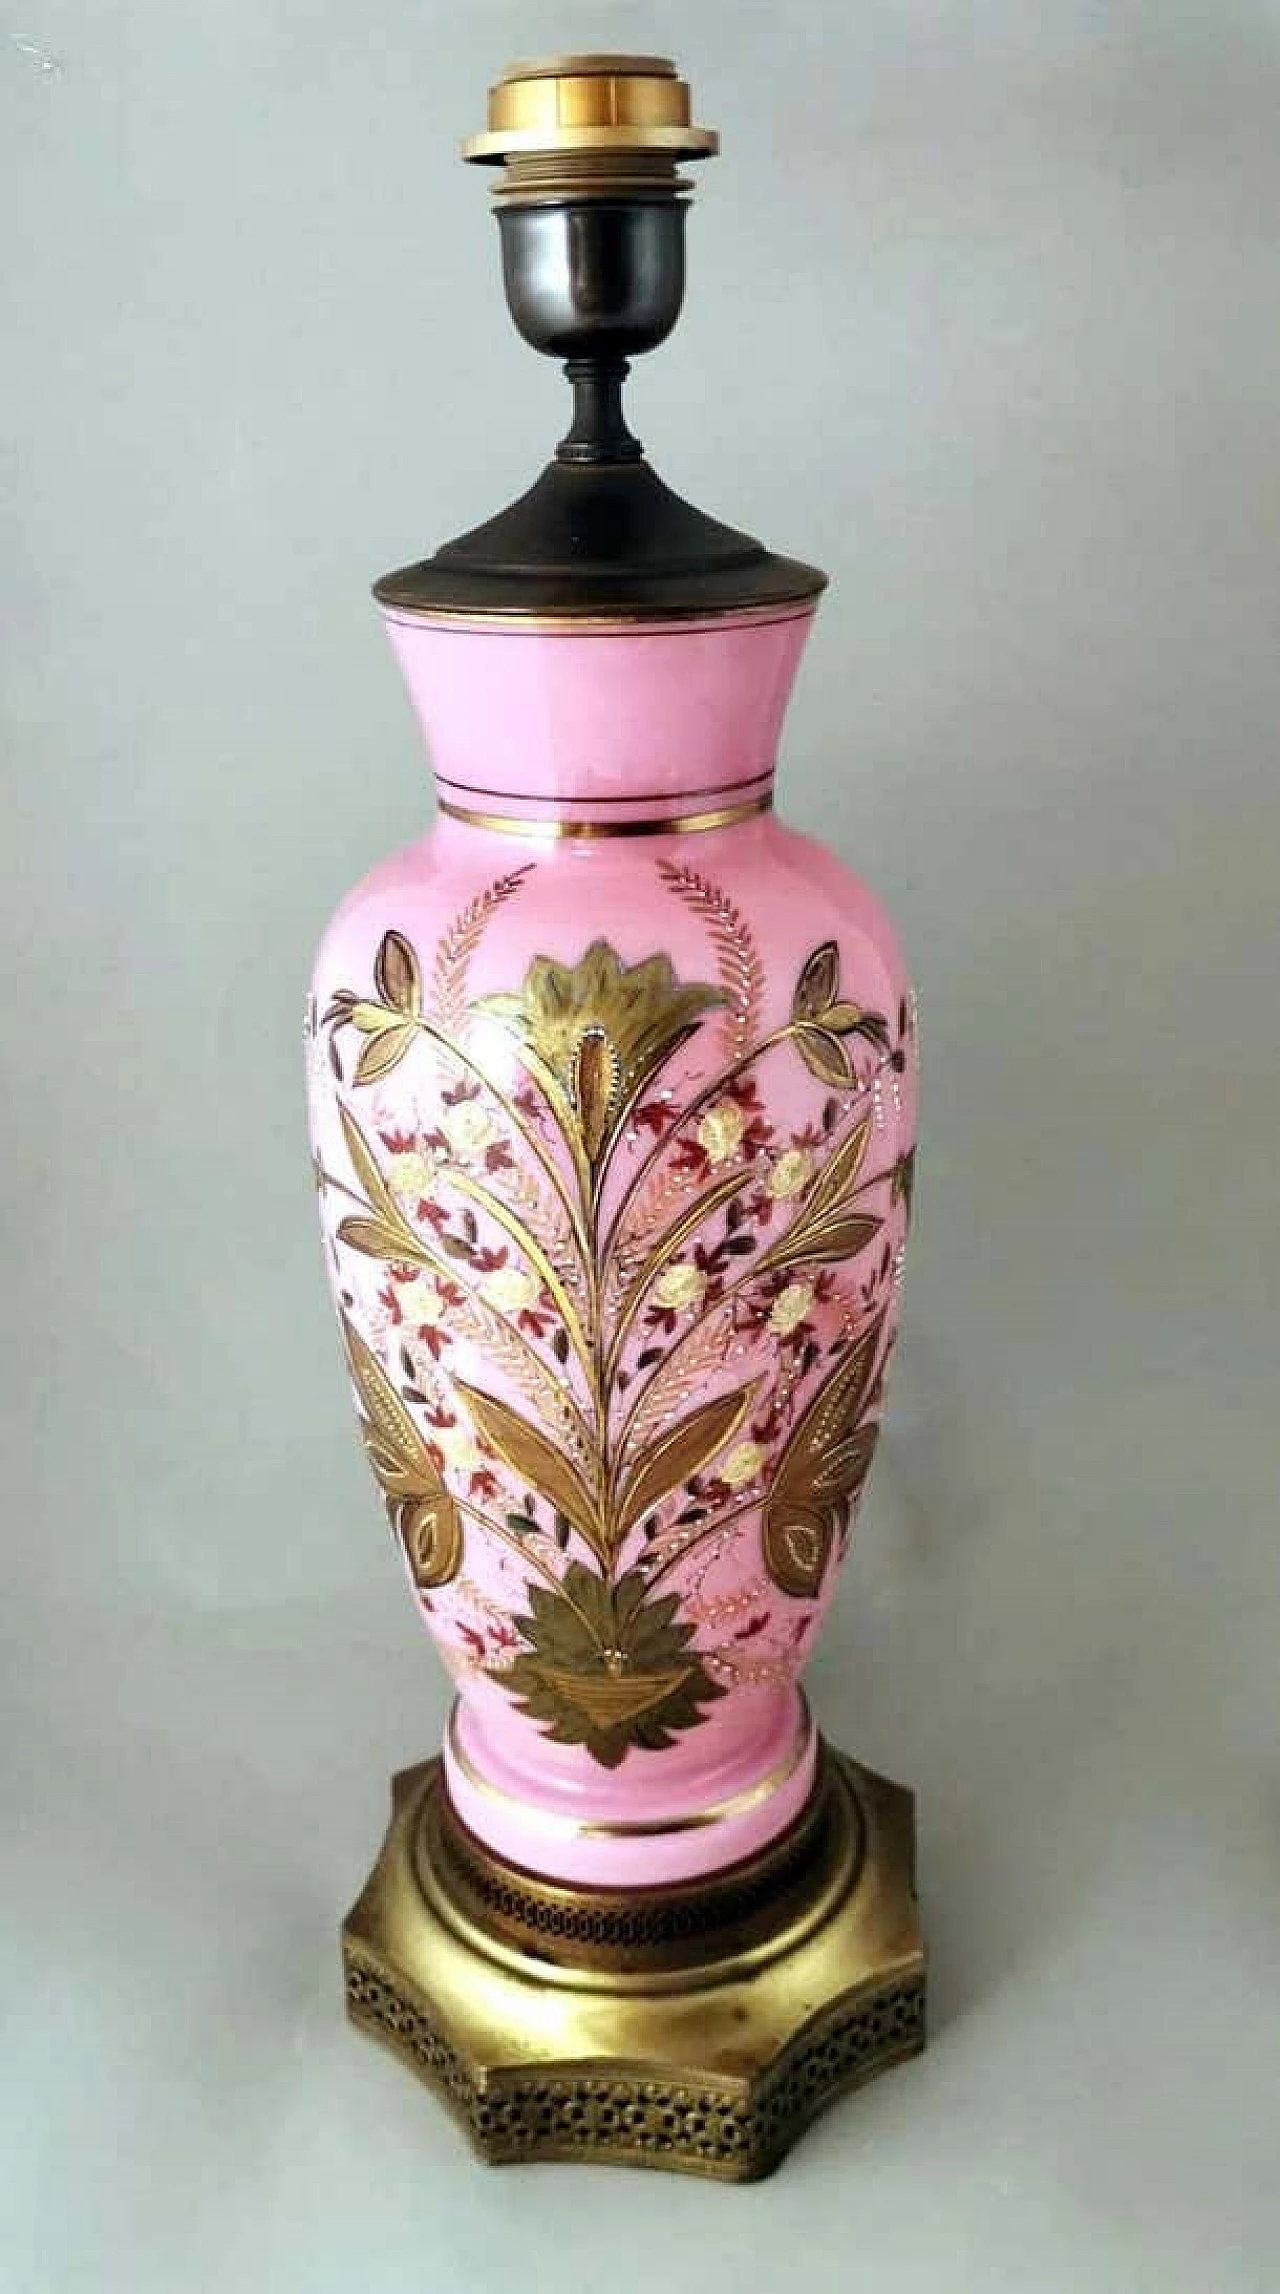 Napoleon III style table lamp in hand-painted opaline glass, late 19th century 1